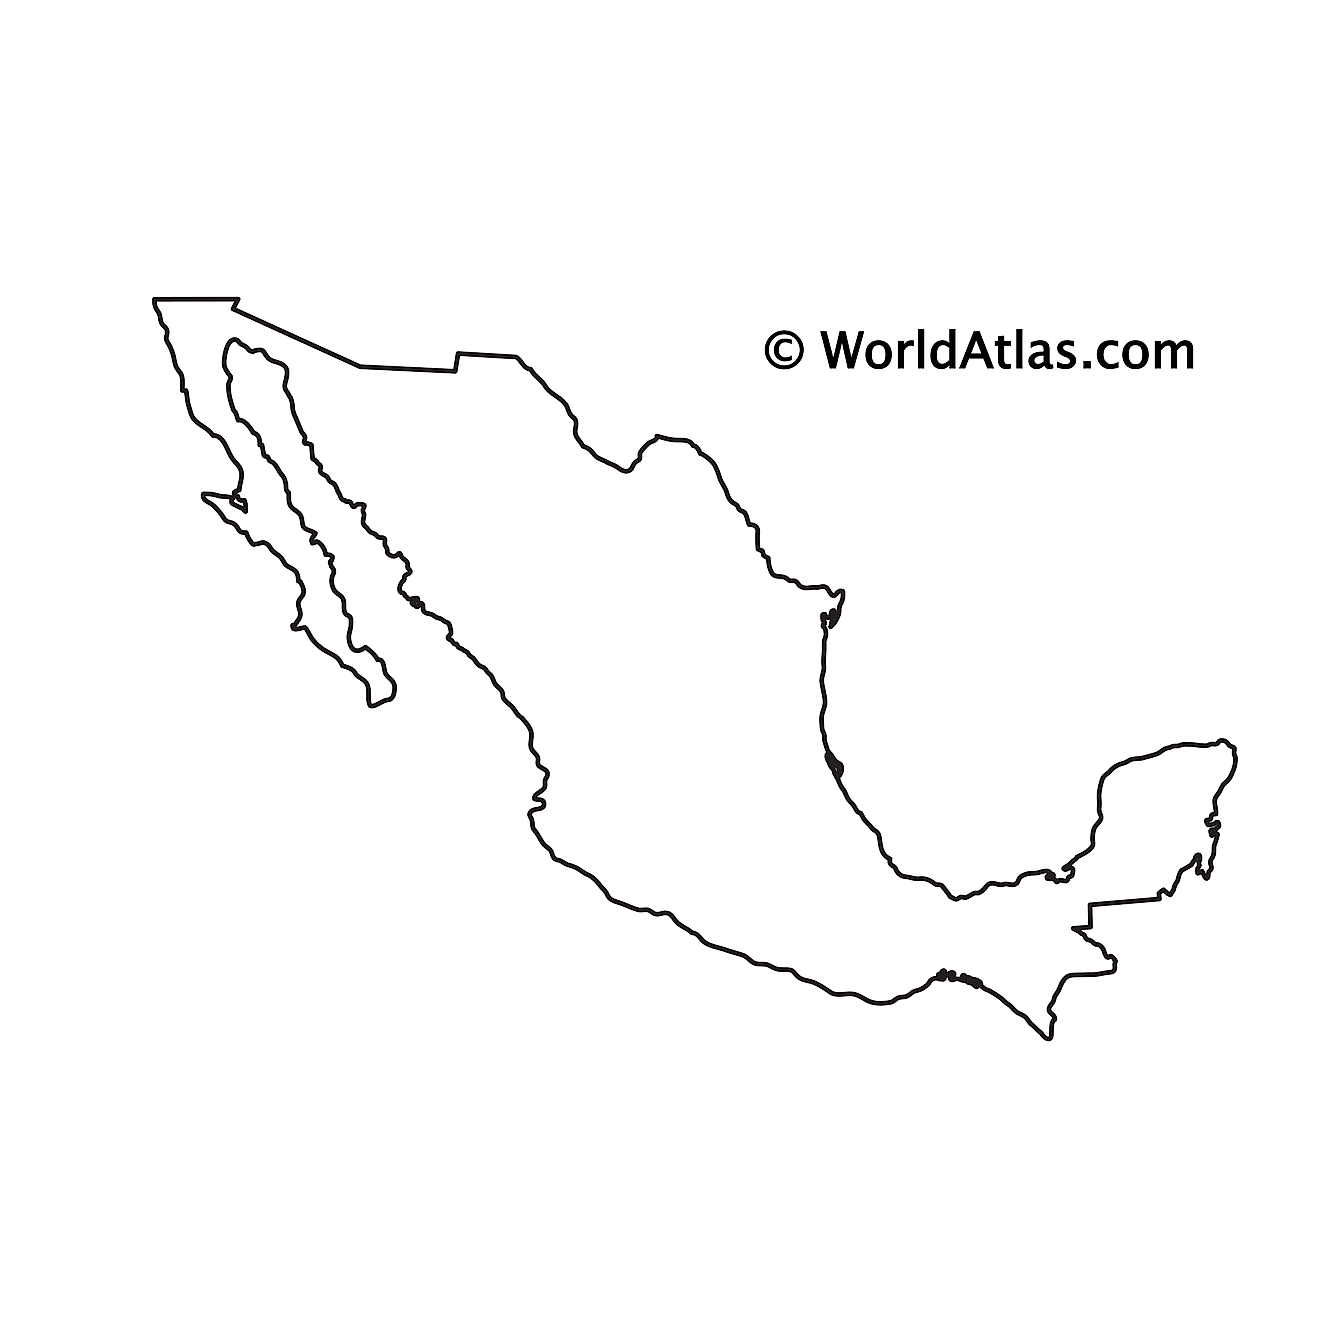 Blank Outline Map of Mexico 